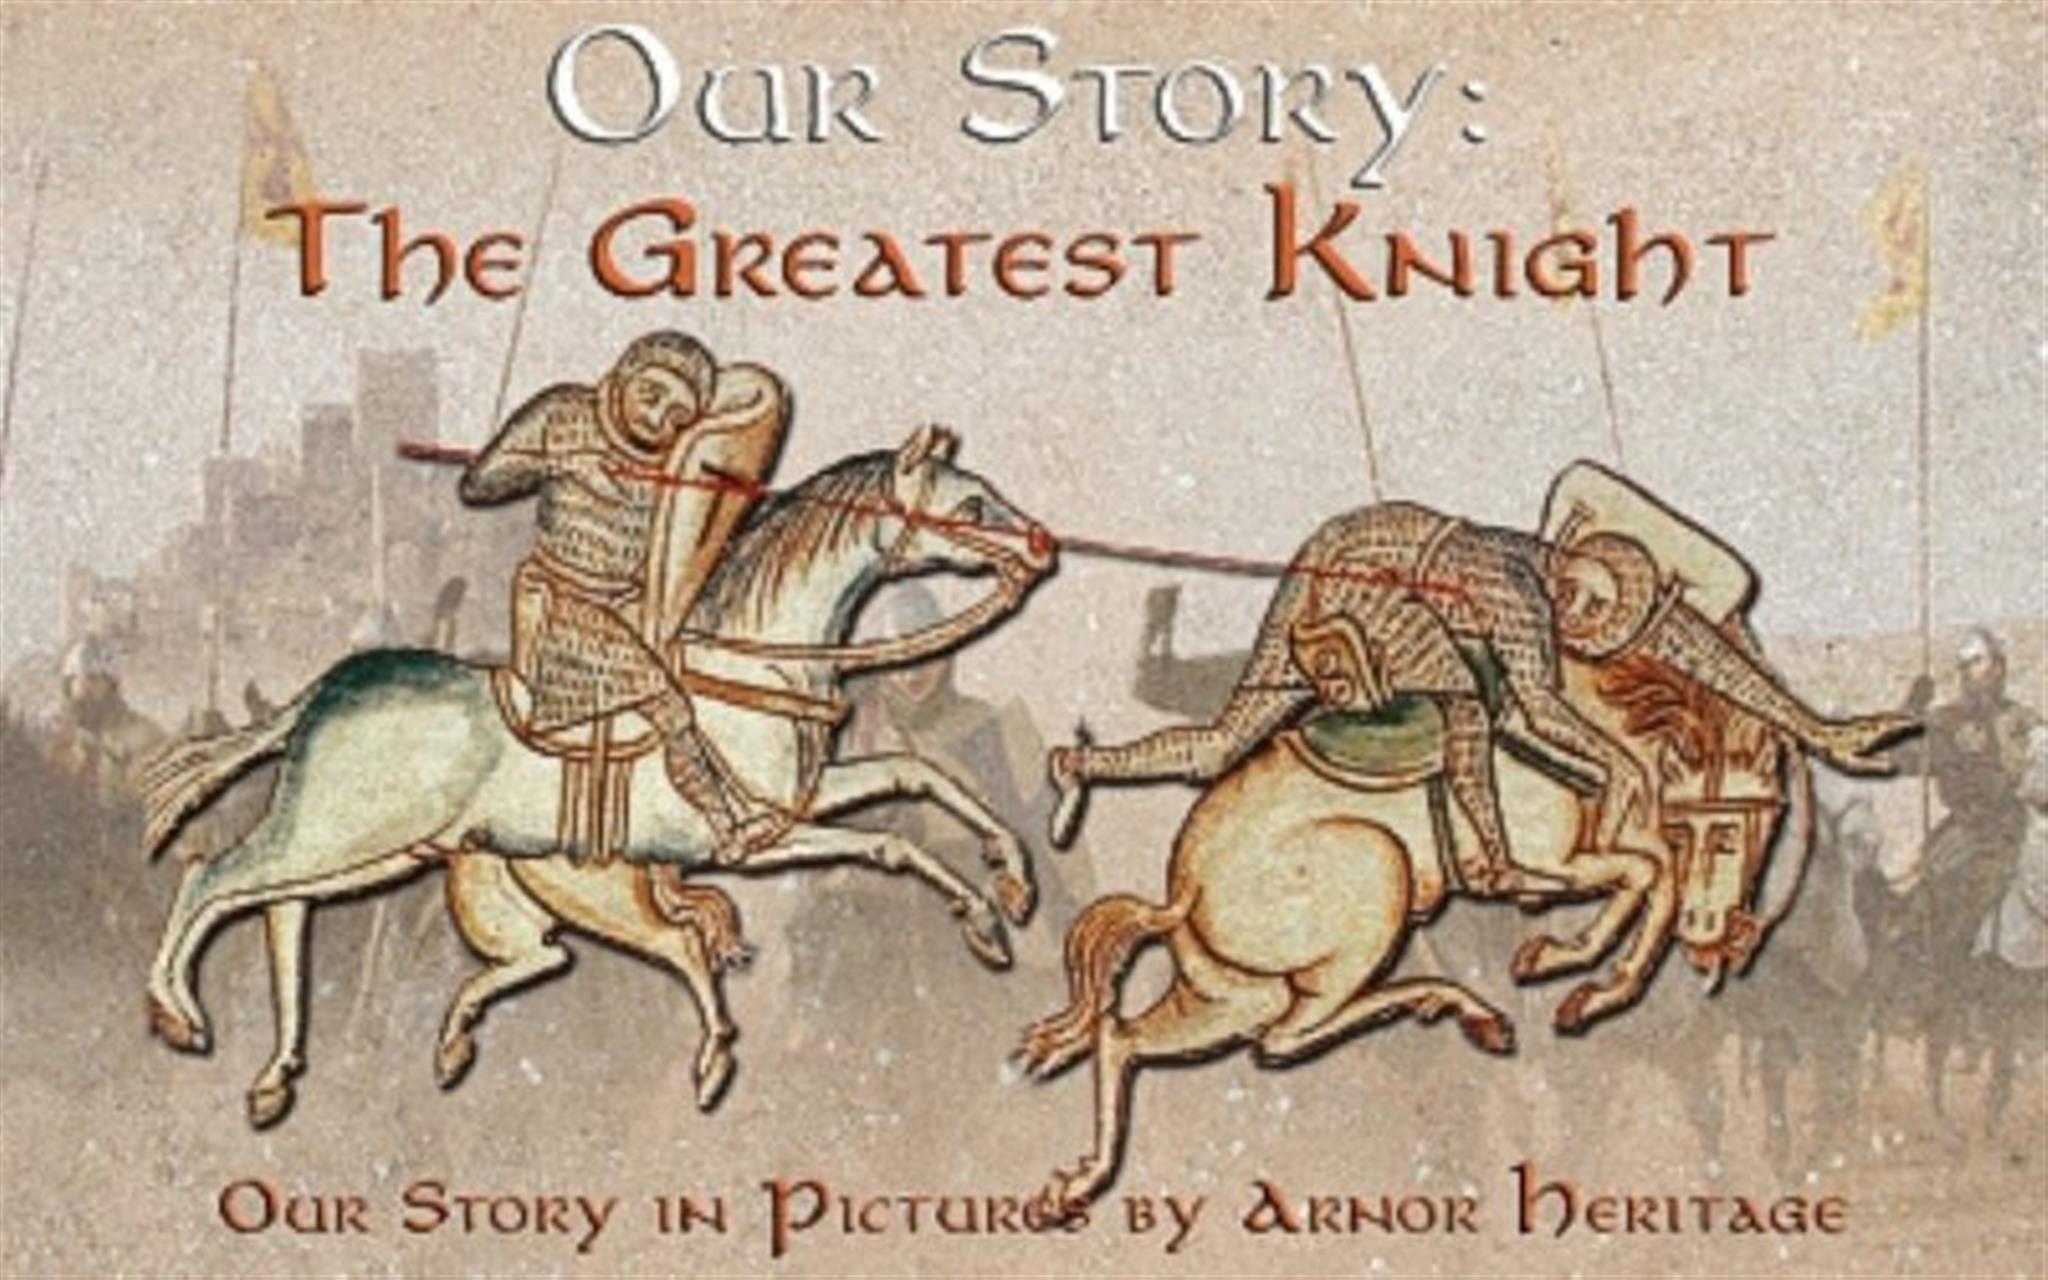 The Greatest Knight – William Marshal